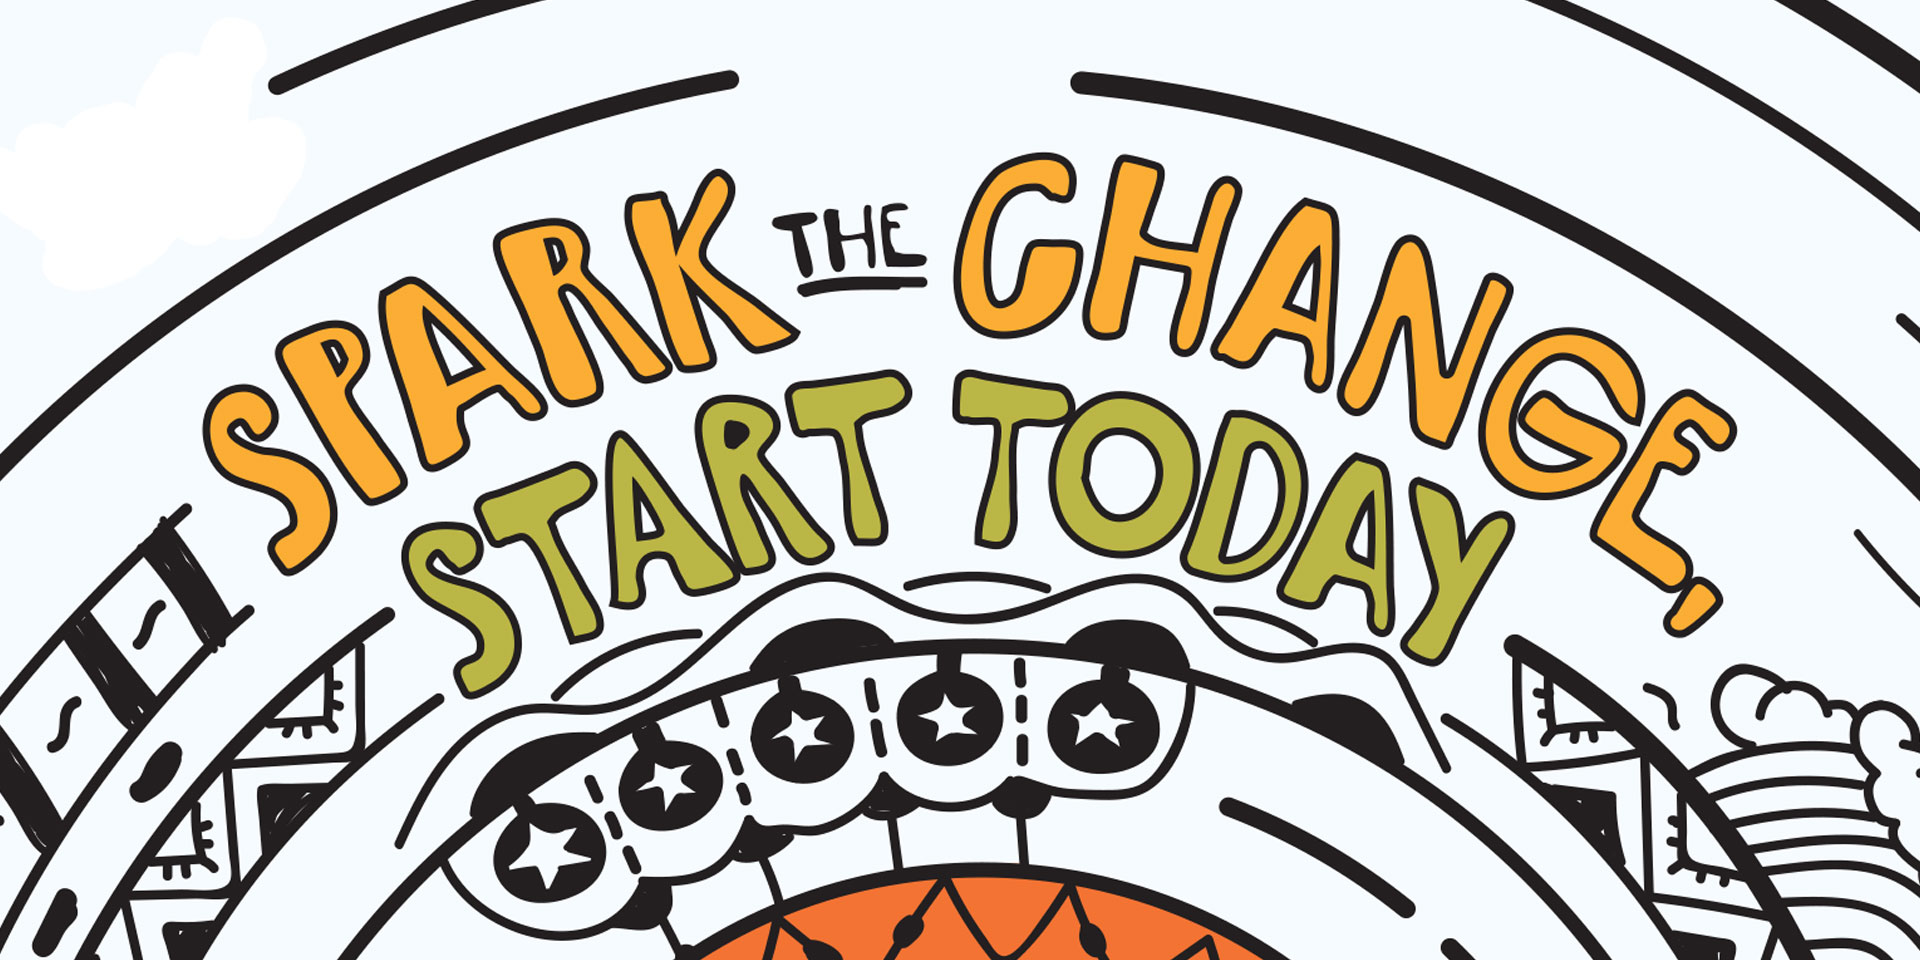 Spark the Change, Start Today